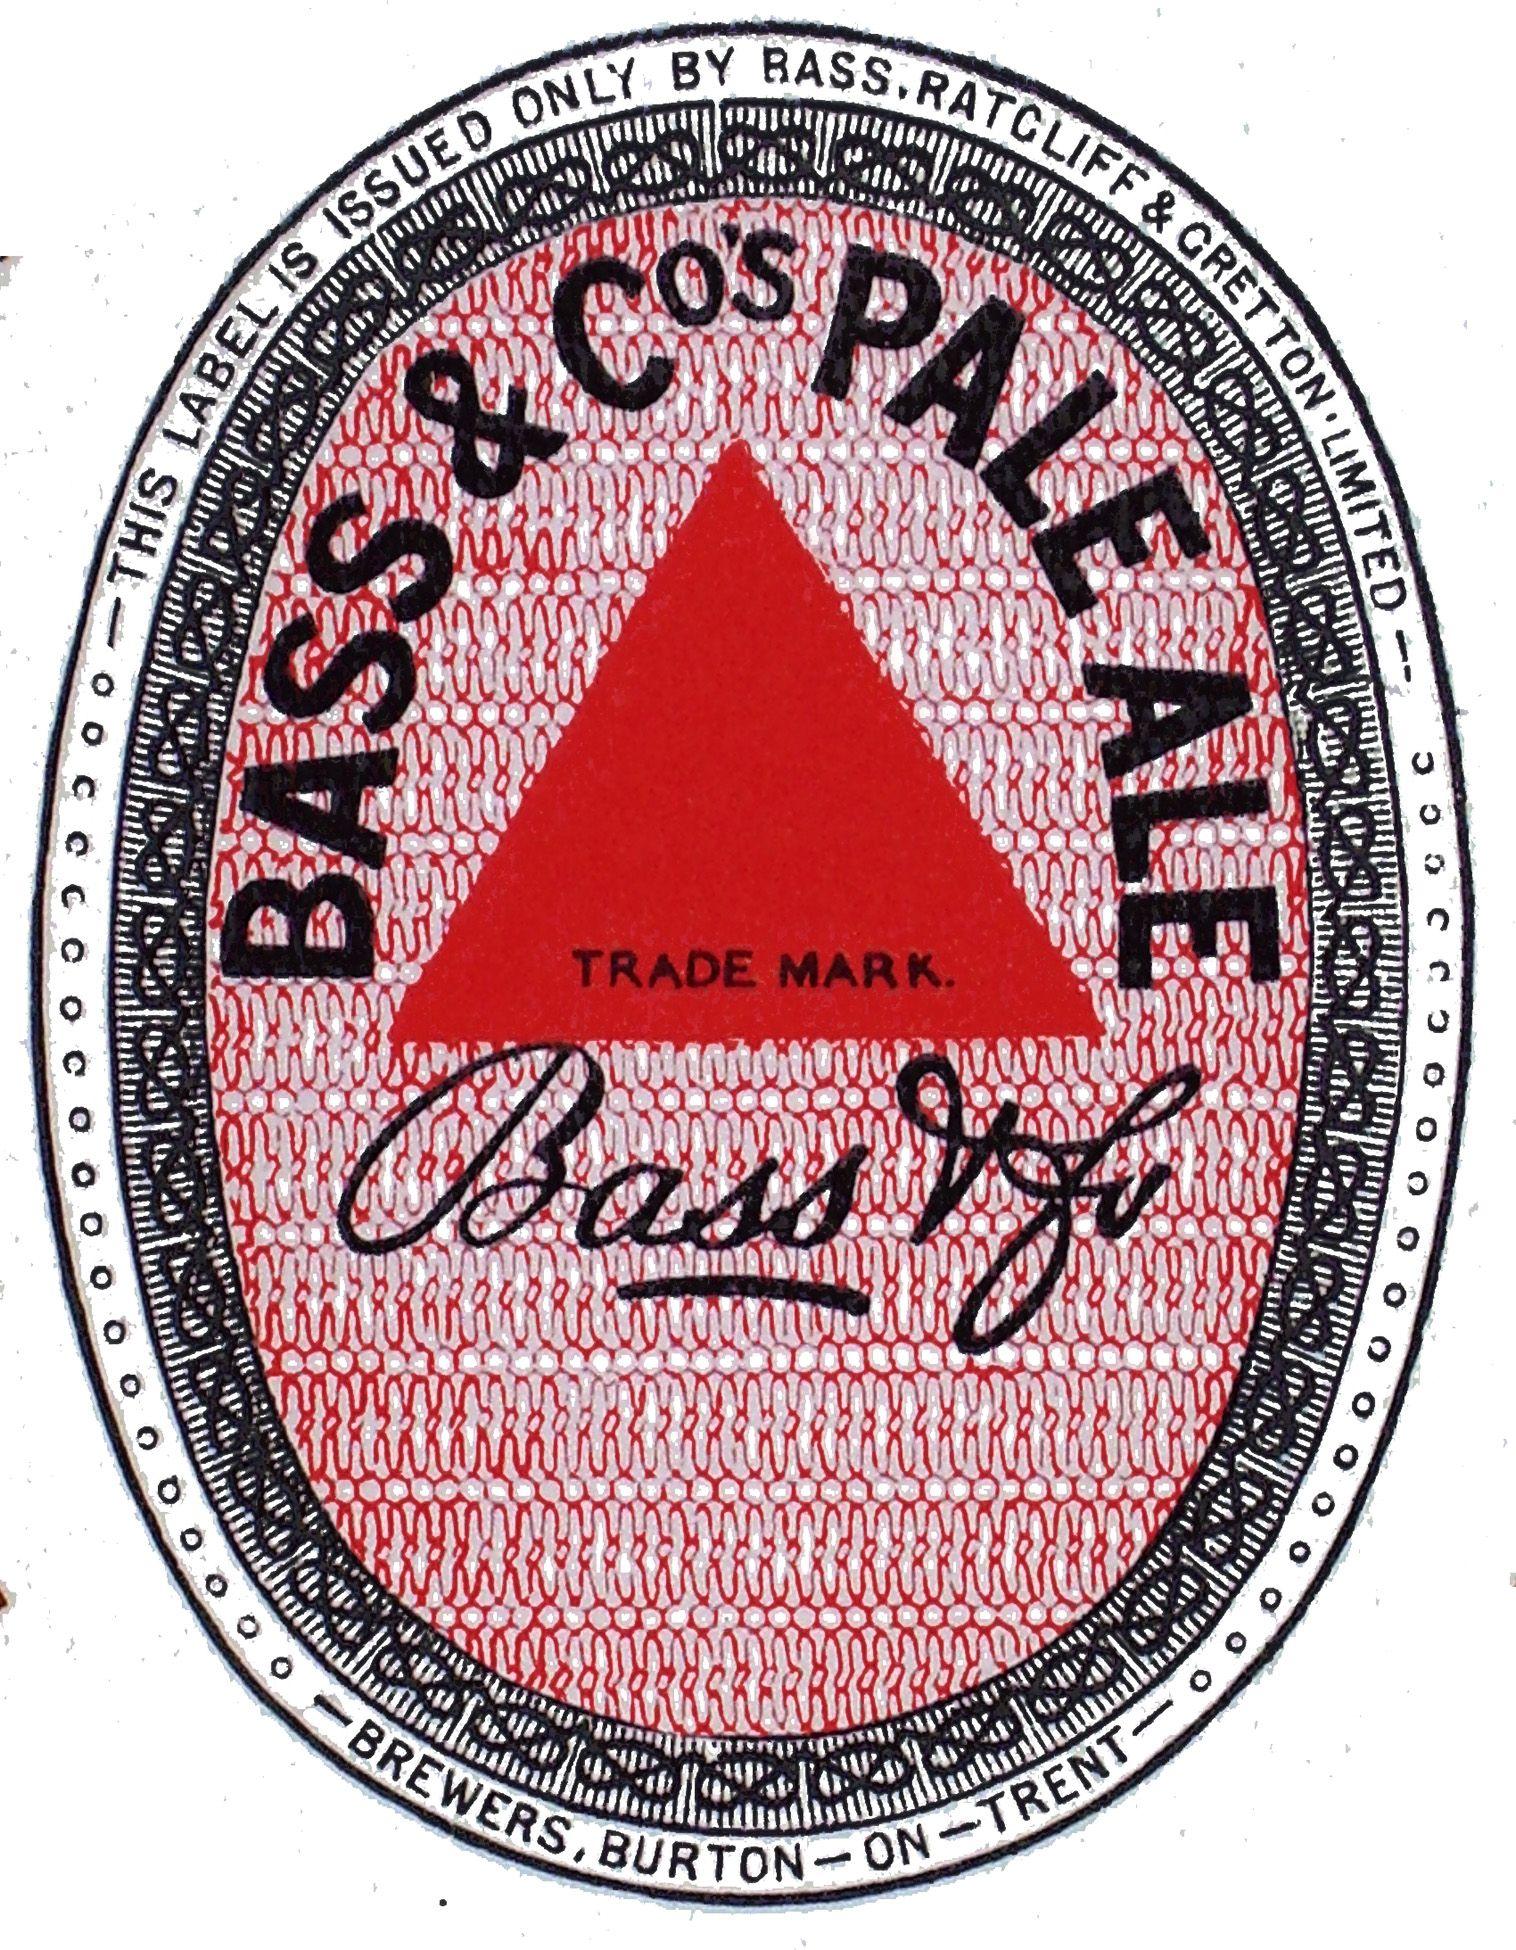 Bass Beer Logo - The Bass red triangle: things AB-InBev won't tell you | Zythophile